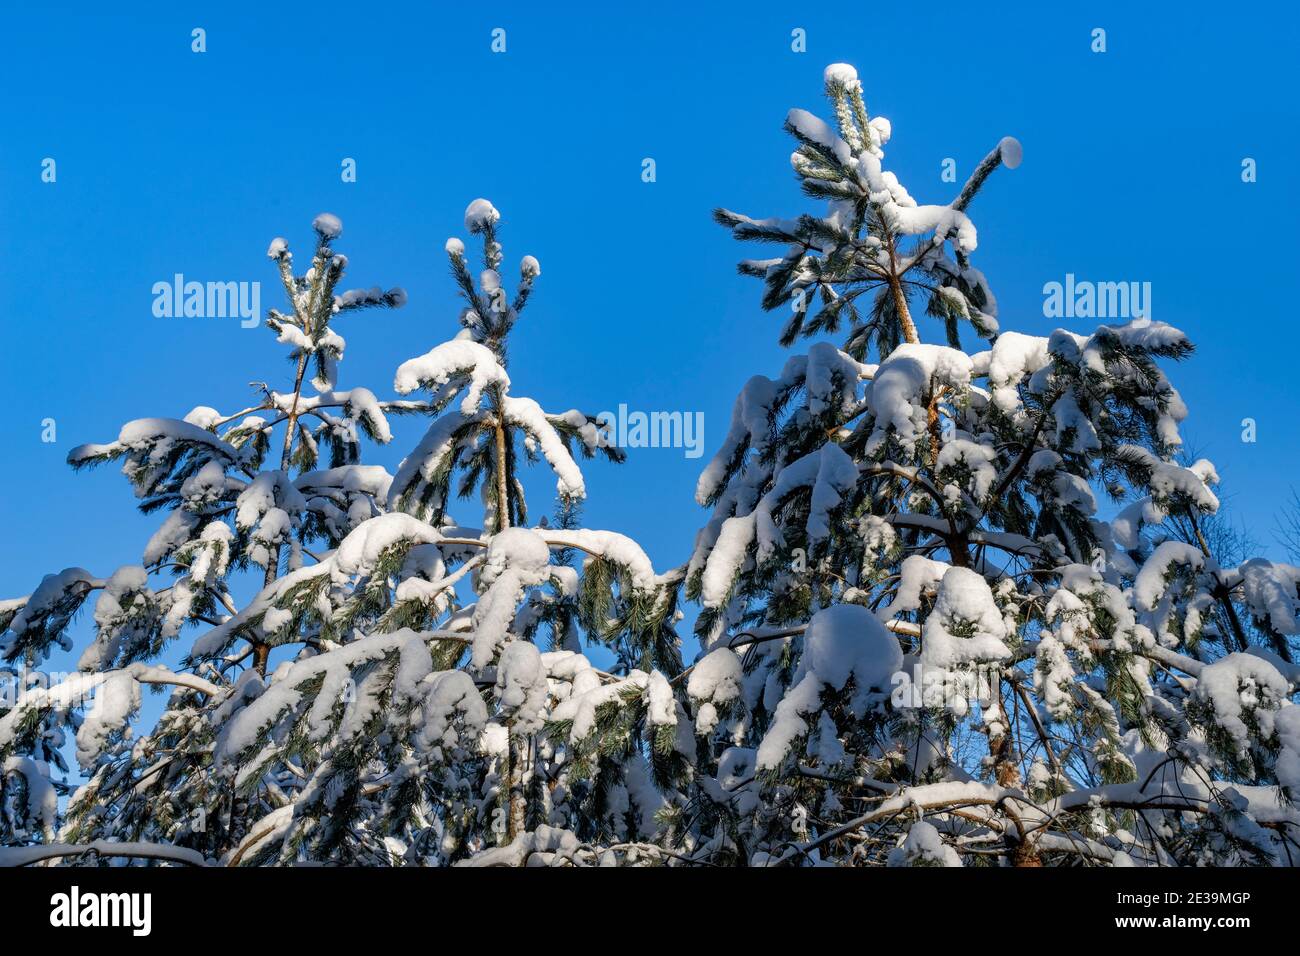 Snow-covered small conifers. Snow on tree branches in Central Europe. Winter season. Stock Photo